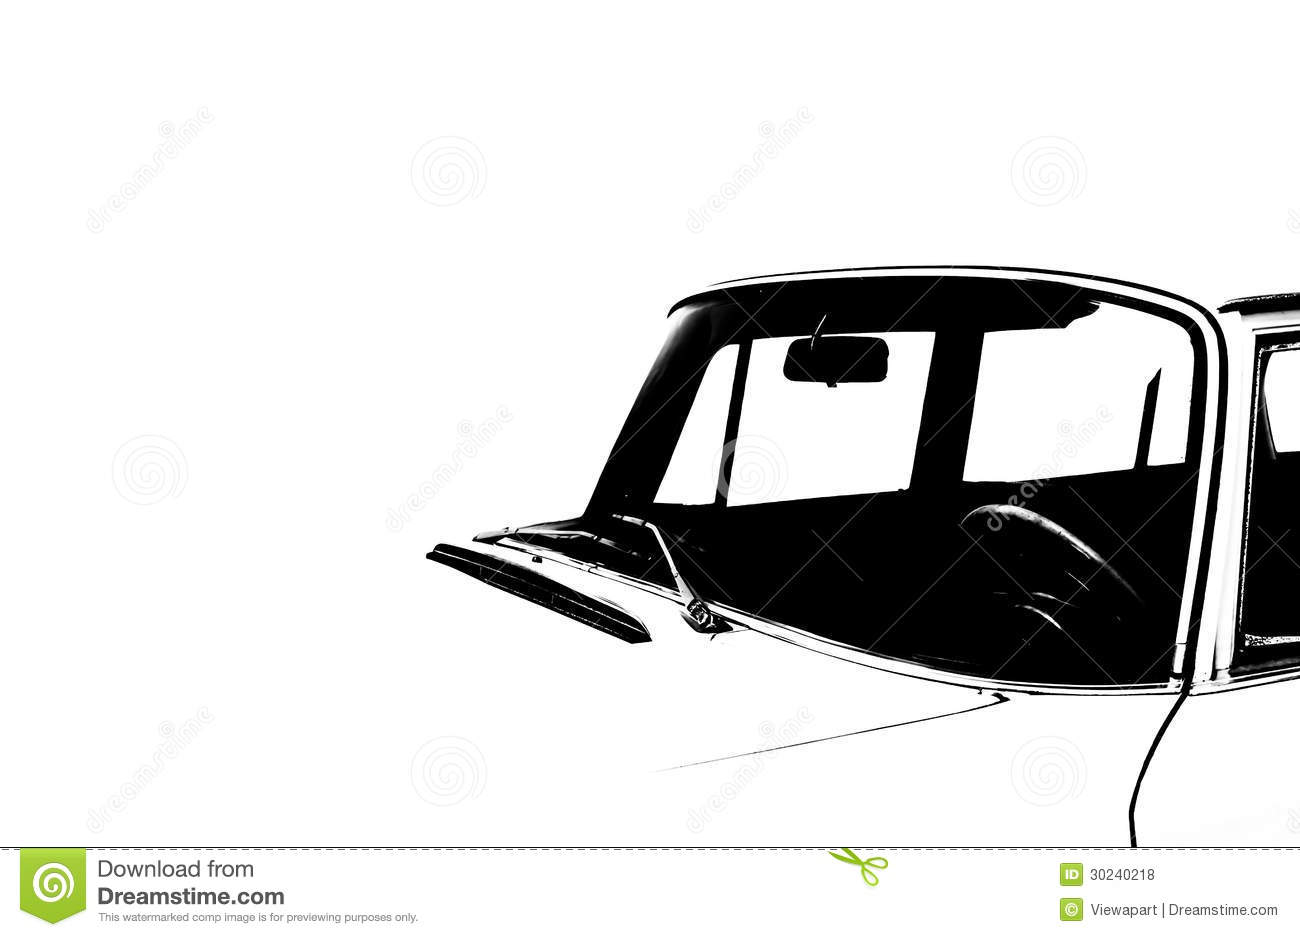 Detail Of A Vintage Car In A Black And White Solihouette